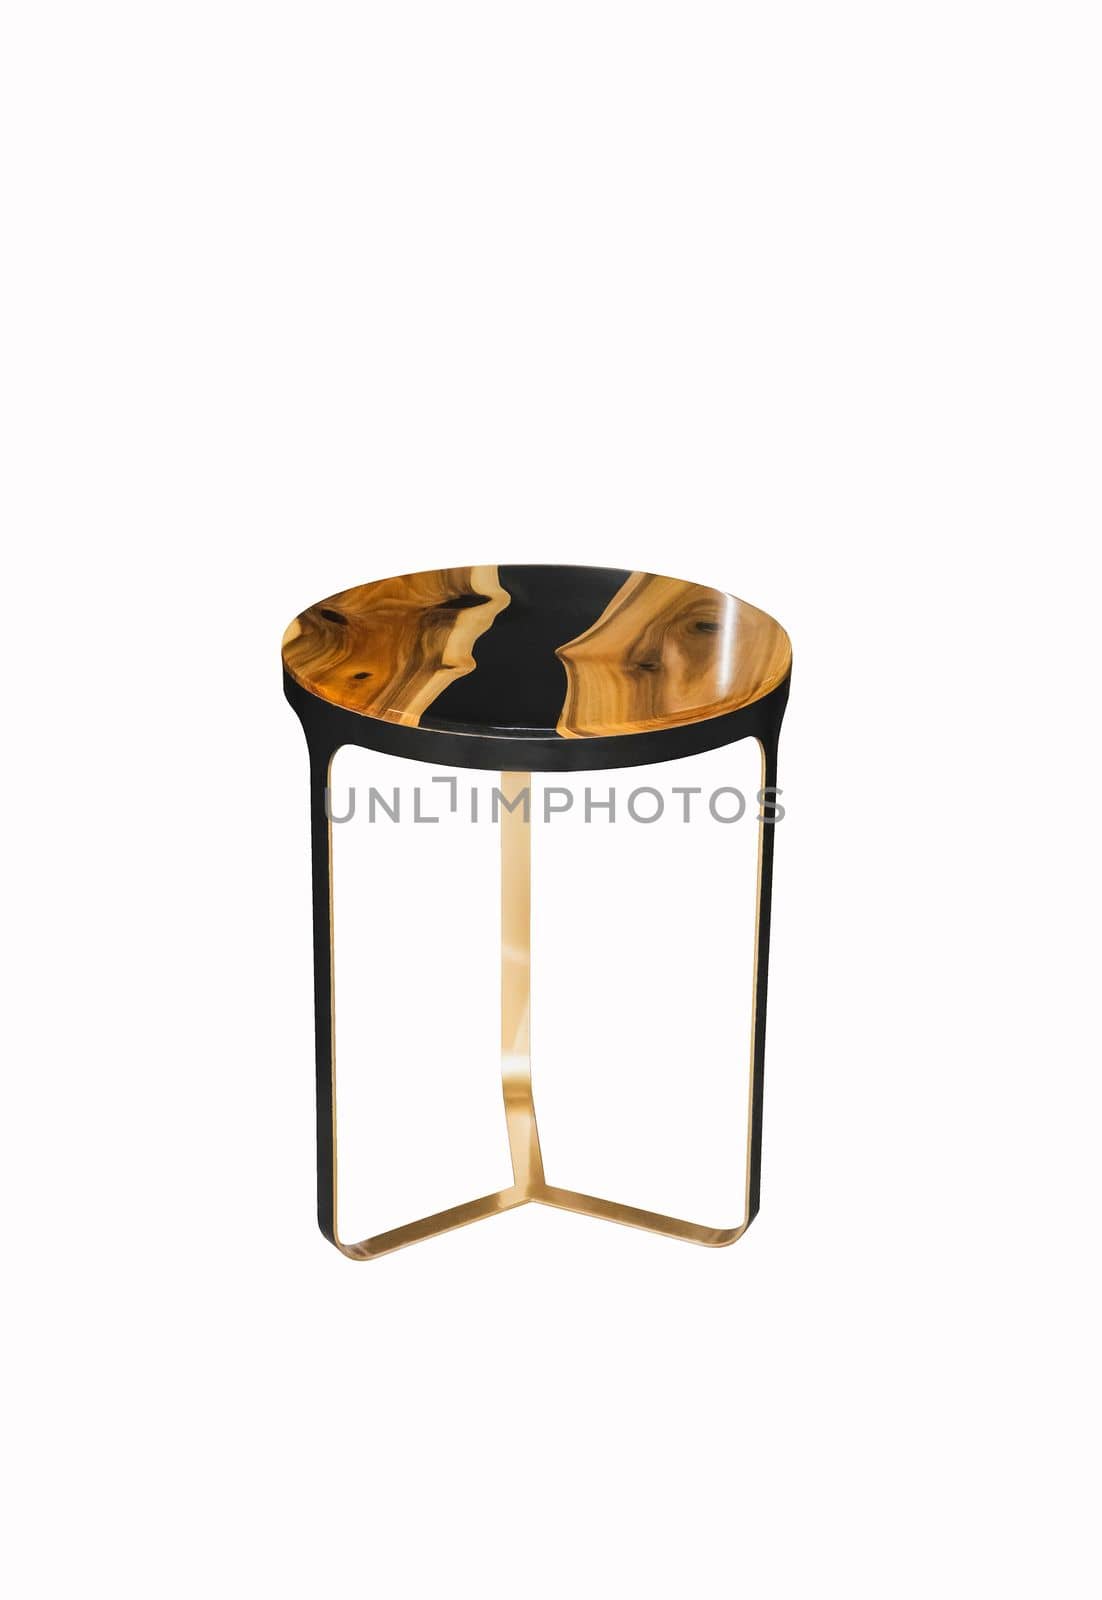 Small epoxy coffee table on white background. Interior element.